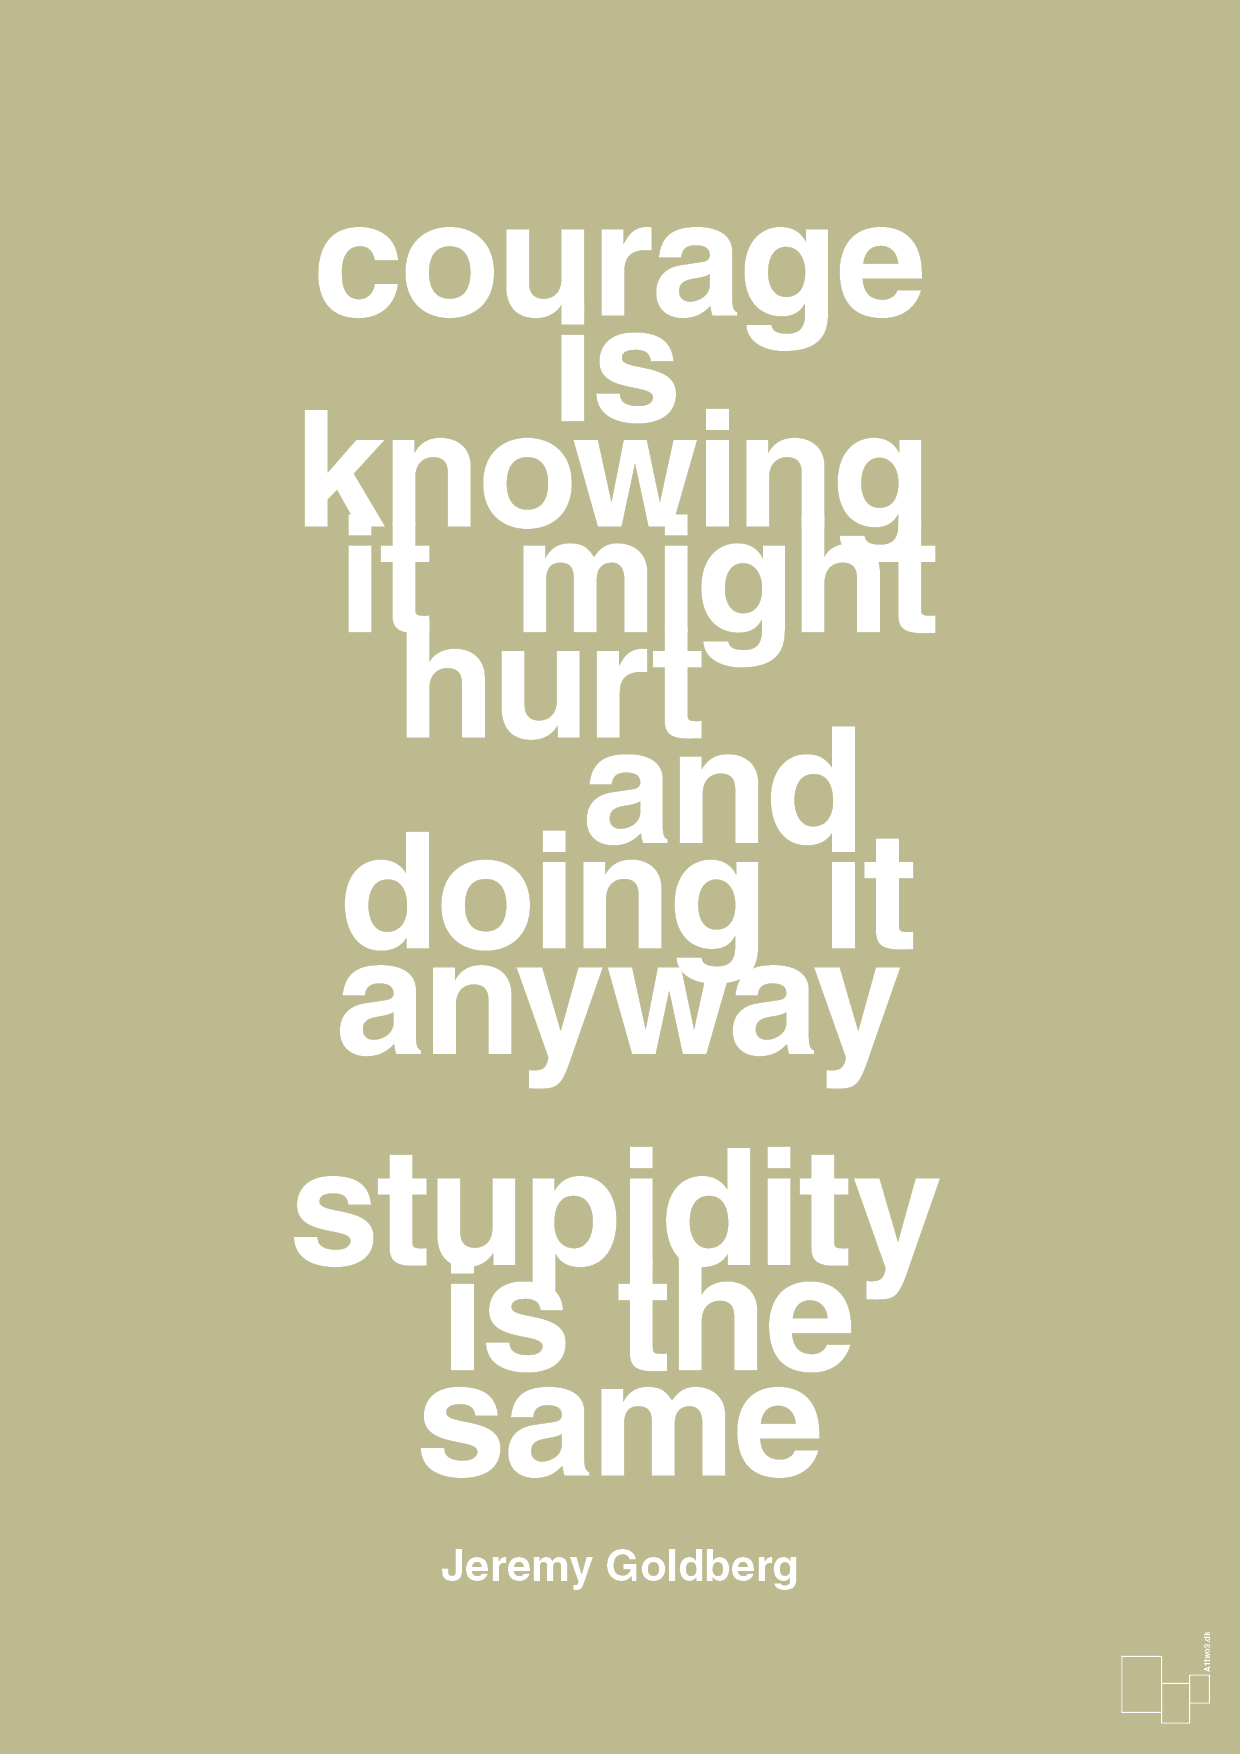 courage is knowing it might hurt and doing it anyway stupidity is the same - Plakat med Citater i Back to Nature